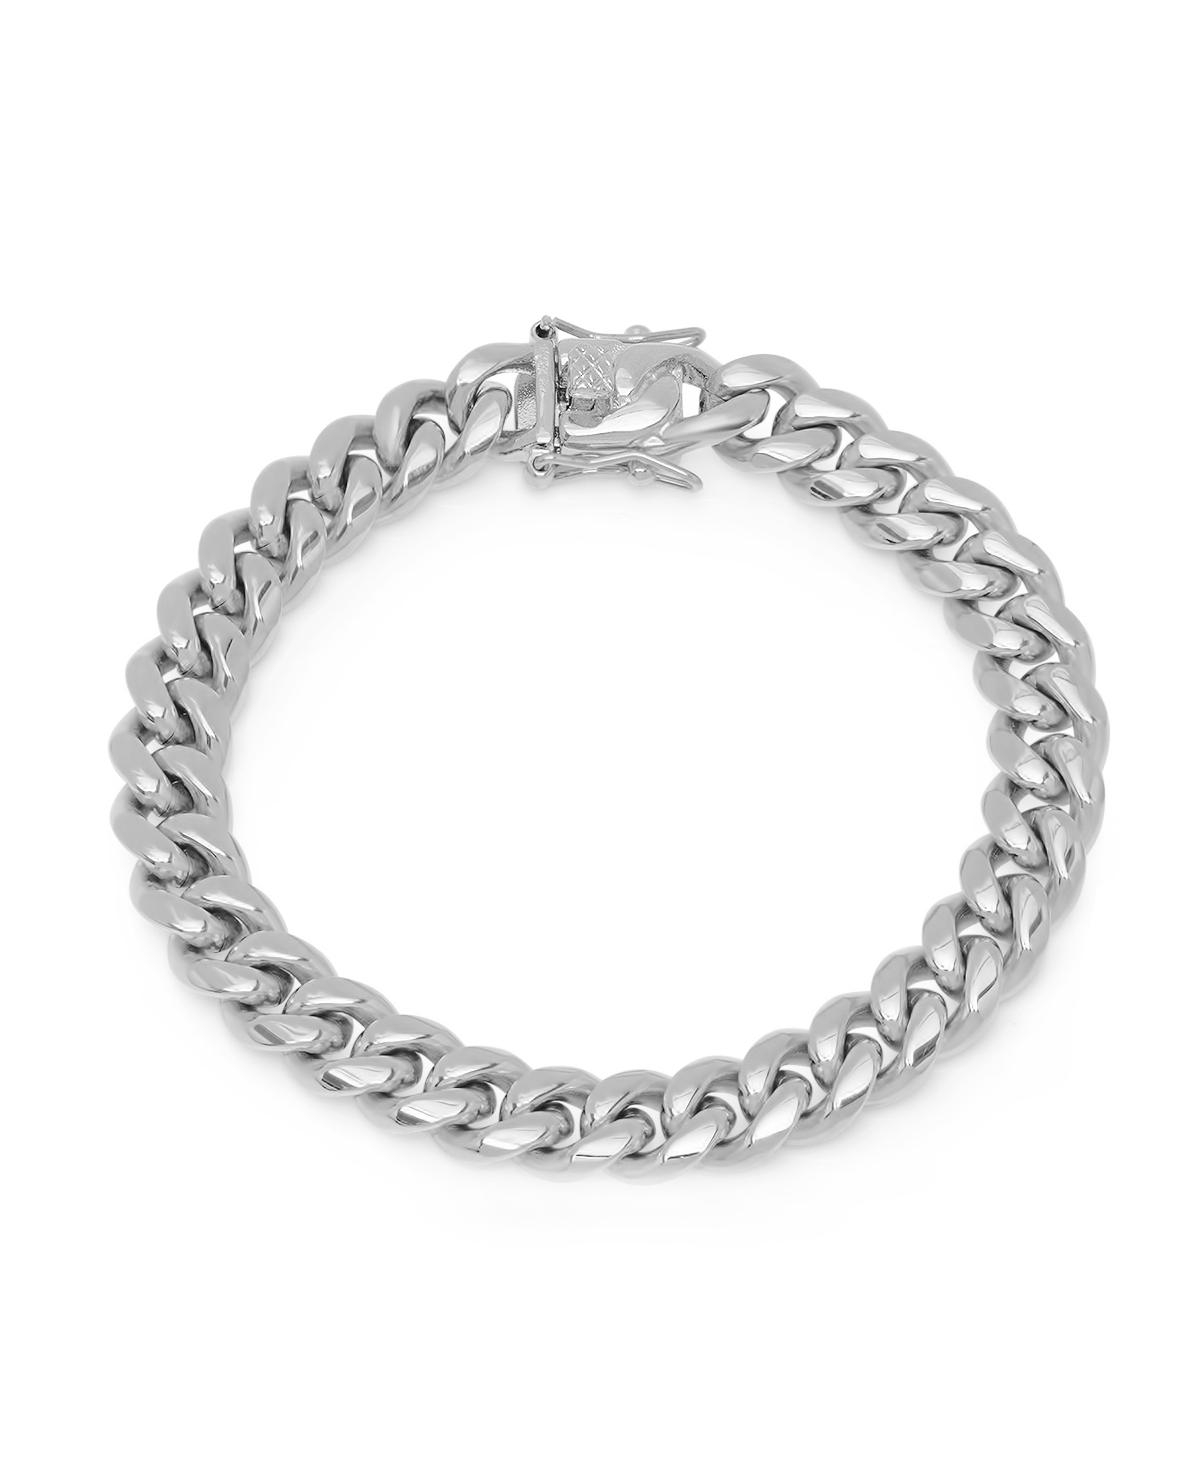 Men's Stainless Steel Miami Cuban Chain Link Style Bracelet with 10mm Box Clasp Bracelet - Silver